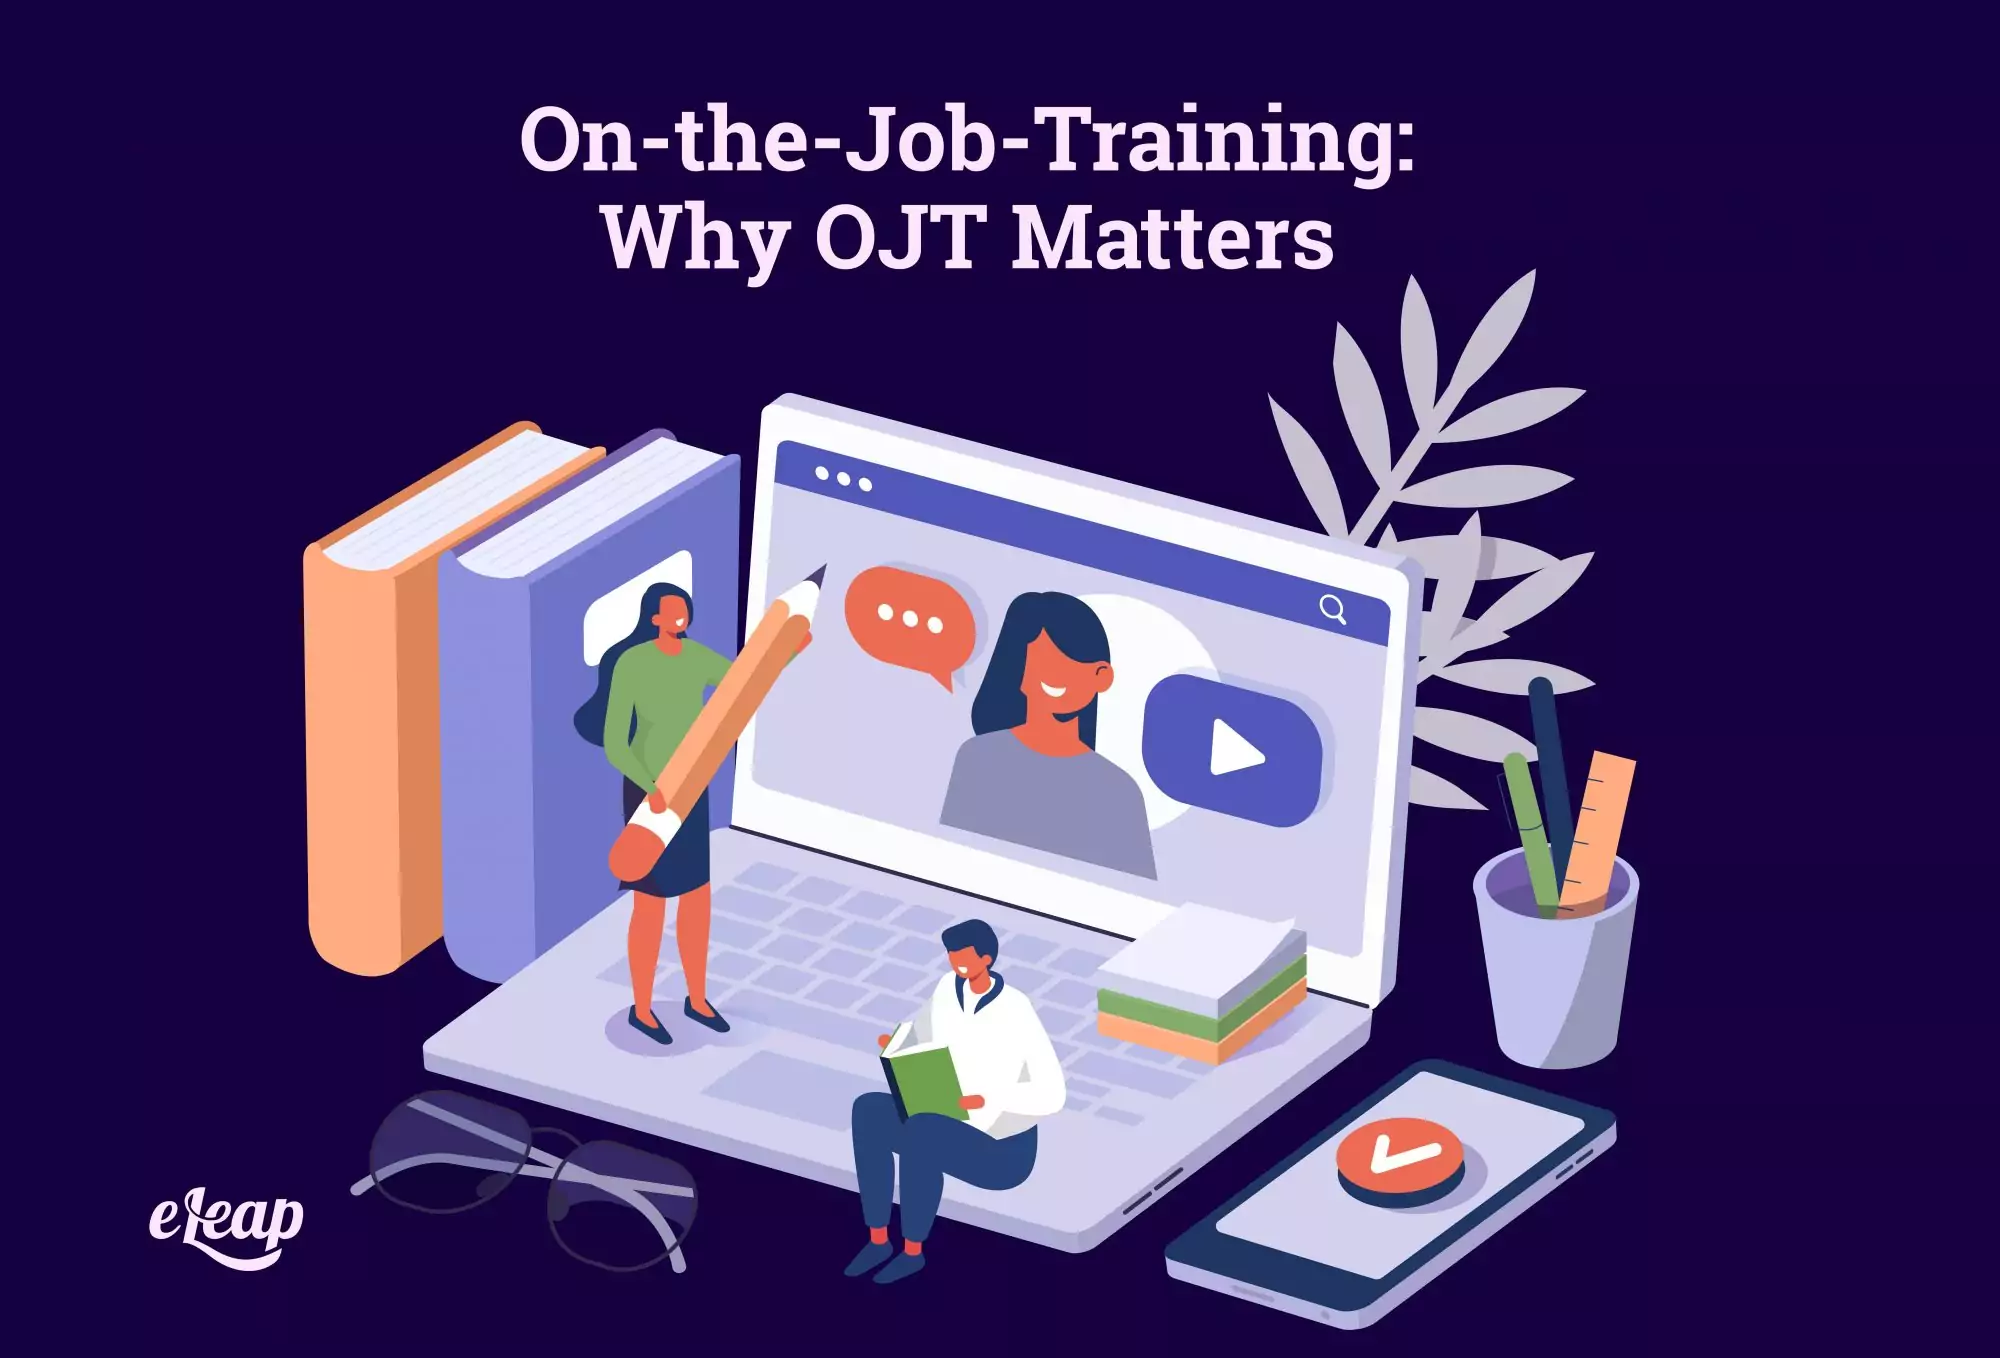 On-the-Job-Training: Why OJT Matters